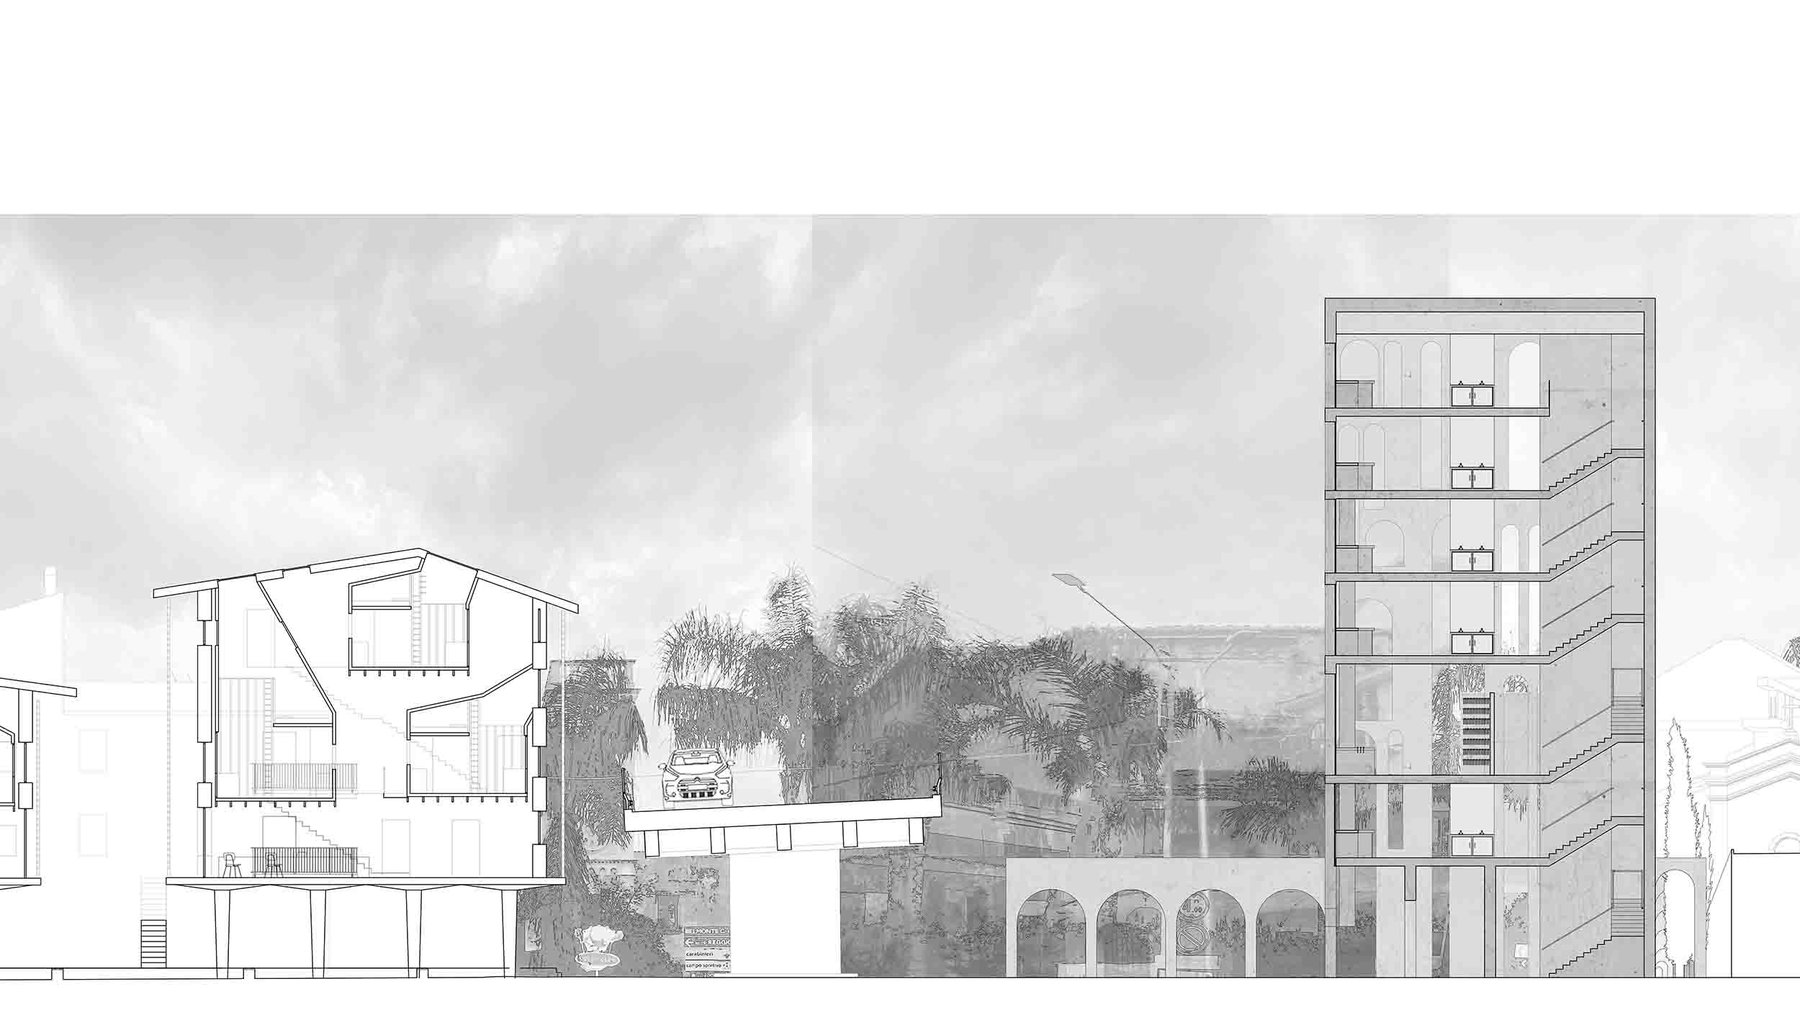 1:100 section of the proposed pasta factory tower in relation to the site context. The proposal uses local food culture as the heart of the concept for a re–urbanisation of Belmonte Calabro. Drawing by Hannah Brueckner